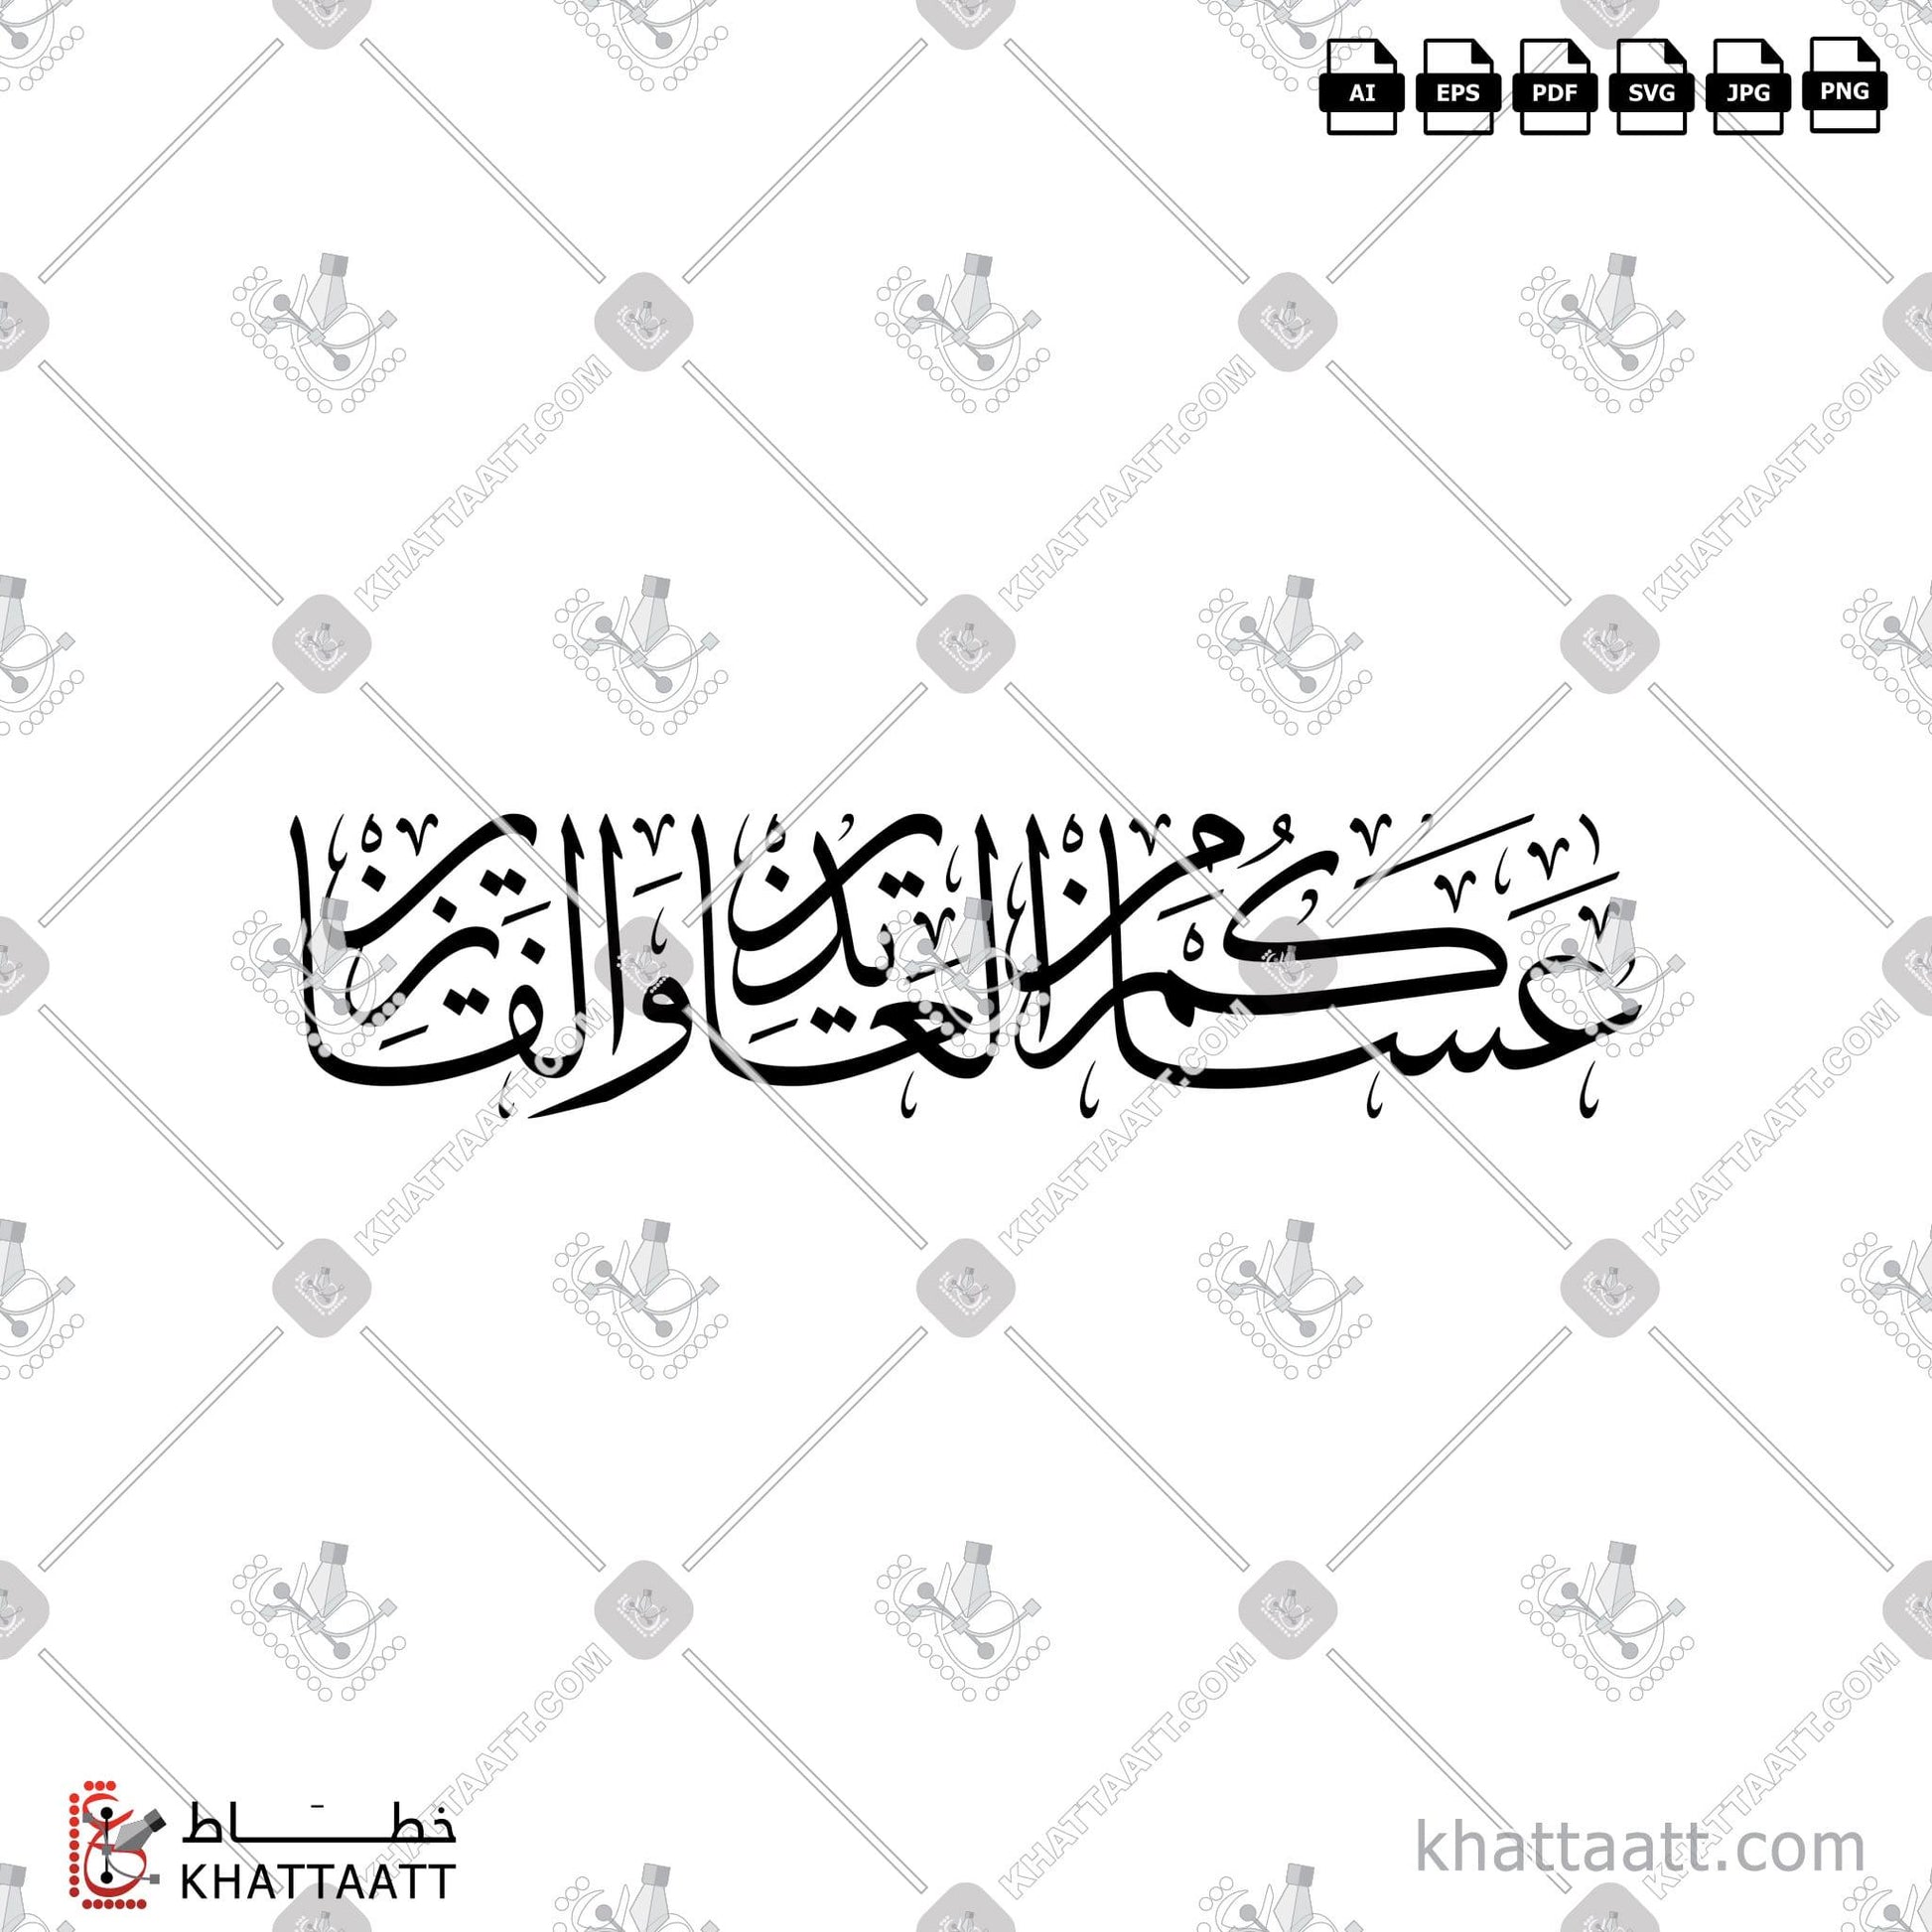 Download Arabic Calligraphy of عساكم من العايدين والفايزين in Thuluth - خط الثلث in vector and .png